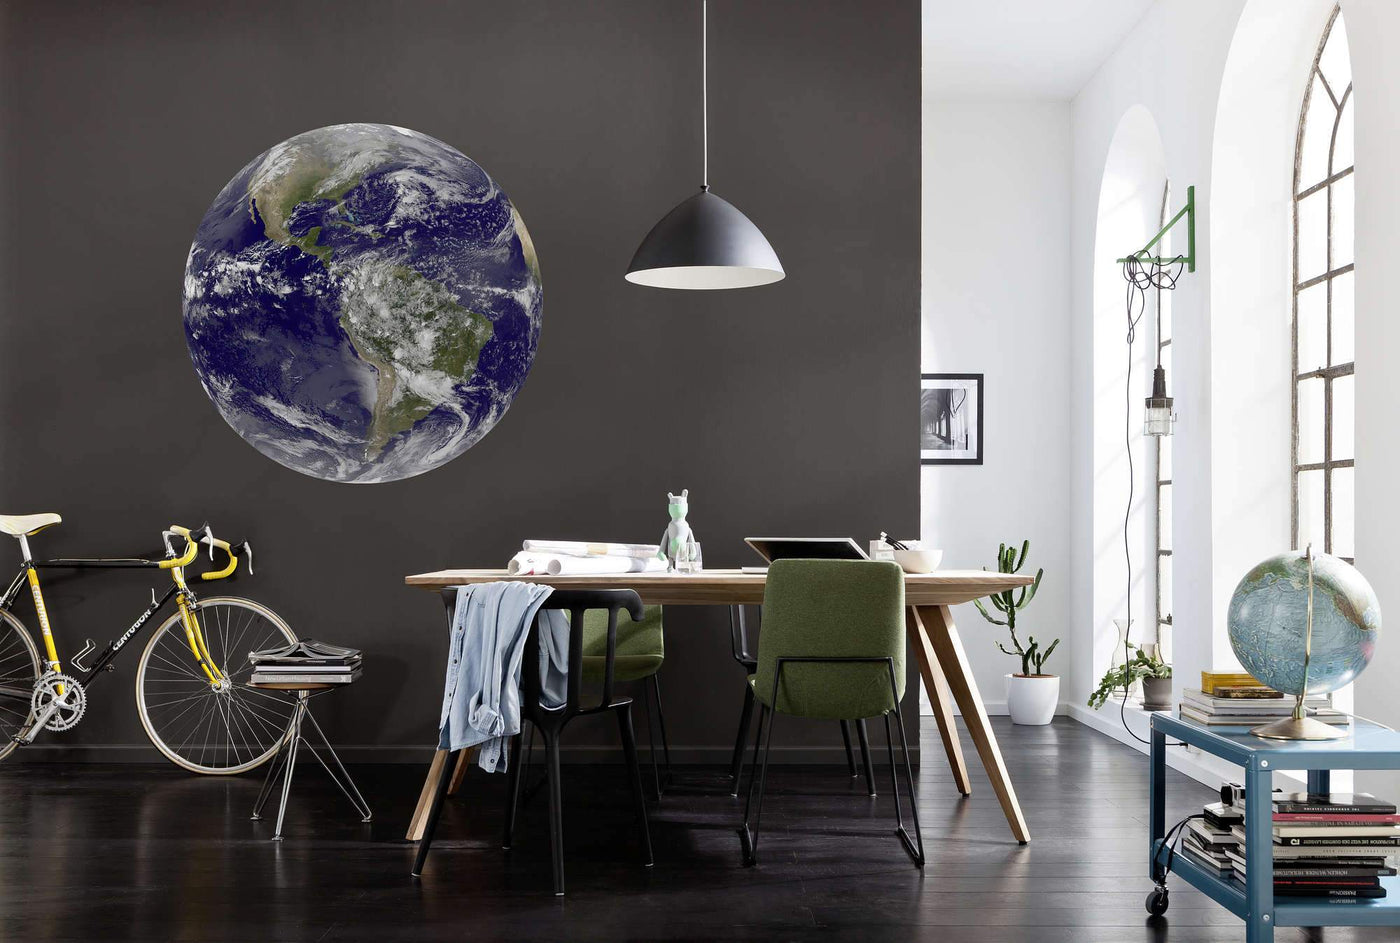 Planet Earth Circle Wall Art (Self-Adhesive)-Wall Decor-ABSTRACT WALLPAPERS, ART WALLPAPER, CIRCLE WALL ART, ECO MURALS, NATURE WALL ART, PATTERN WALLPAPERS, SUSTAINABLE DECOR-Forest Homes-Nature inspired decor-Nature decor